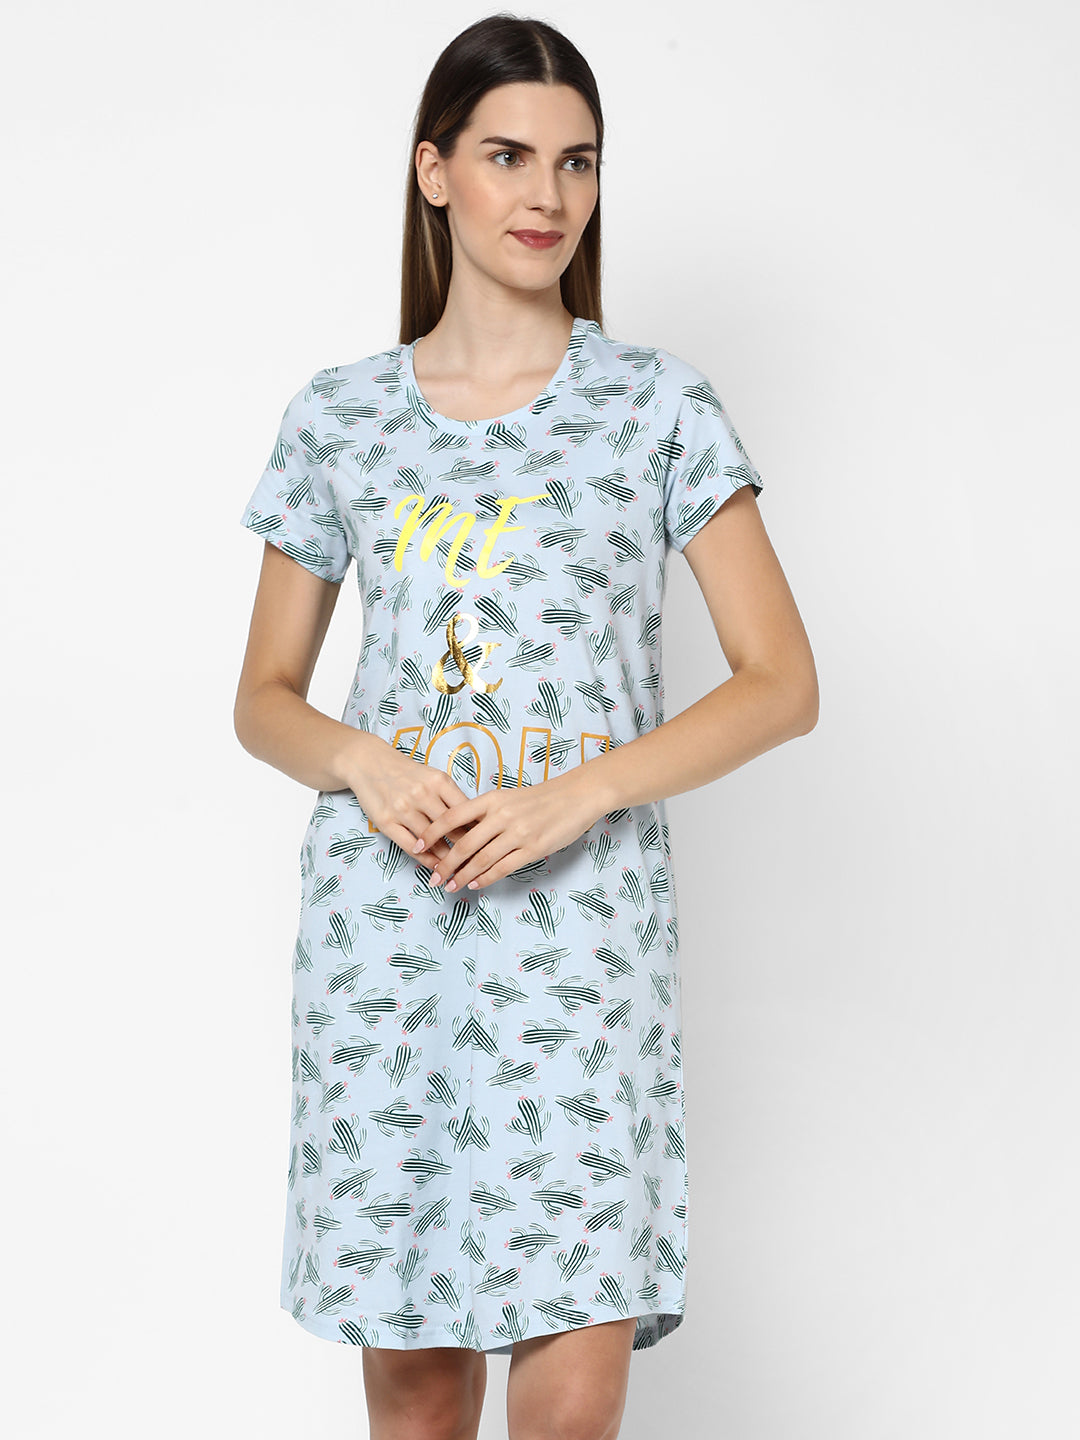 evolove women's cactus print with me and you printed knee length nightgown/short nighty/longpolo, 100% cotton, super soft, trendy design